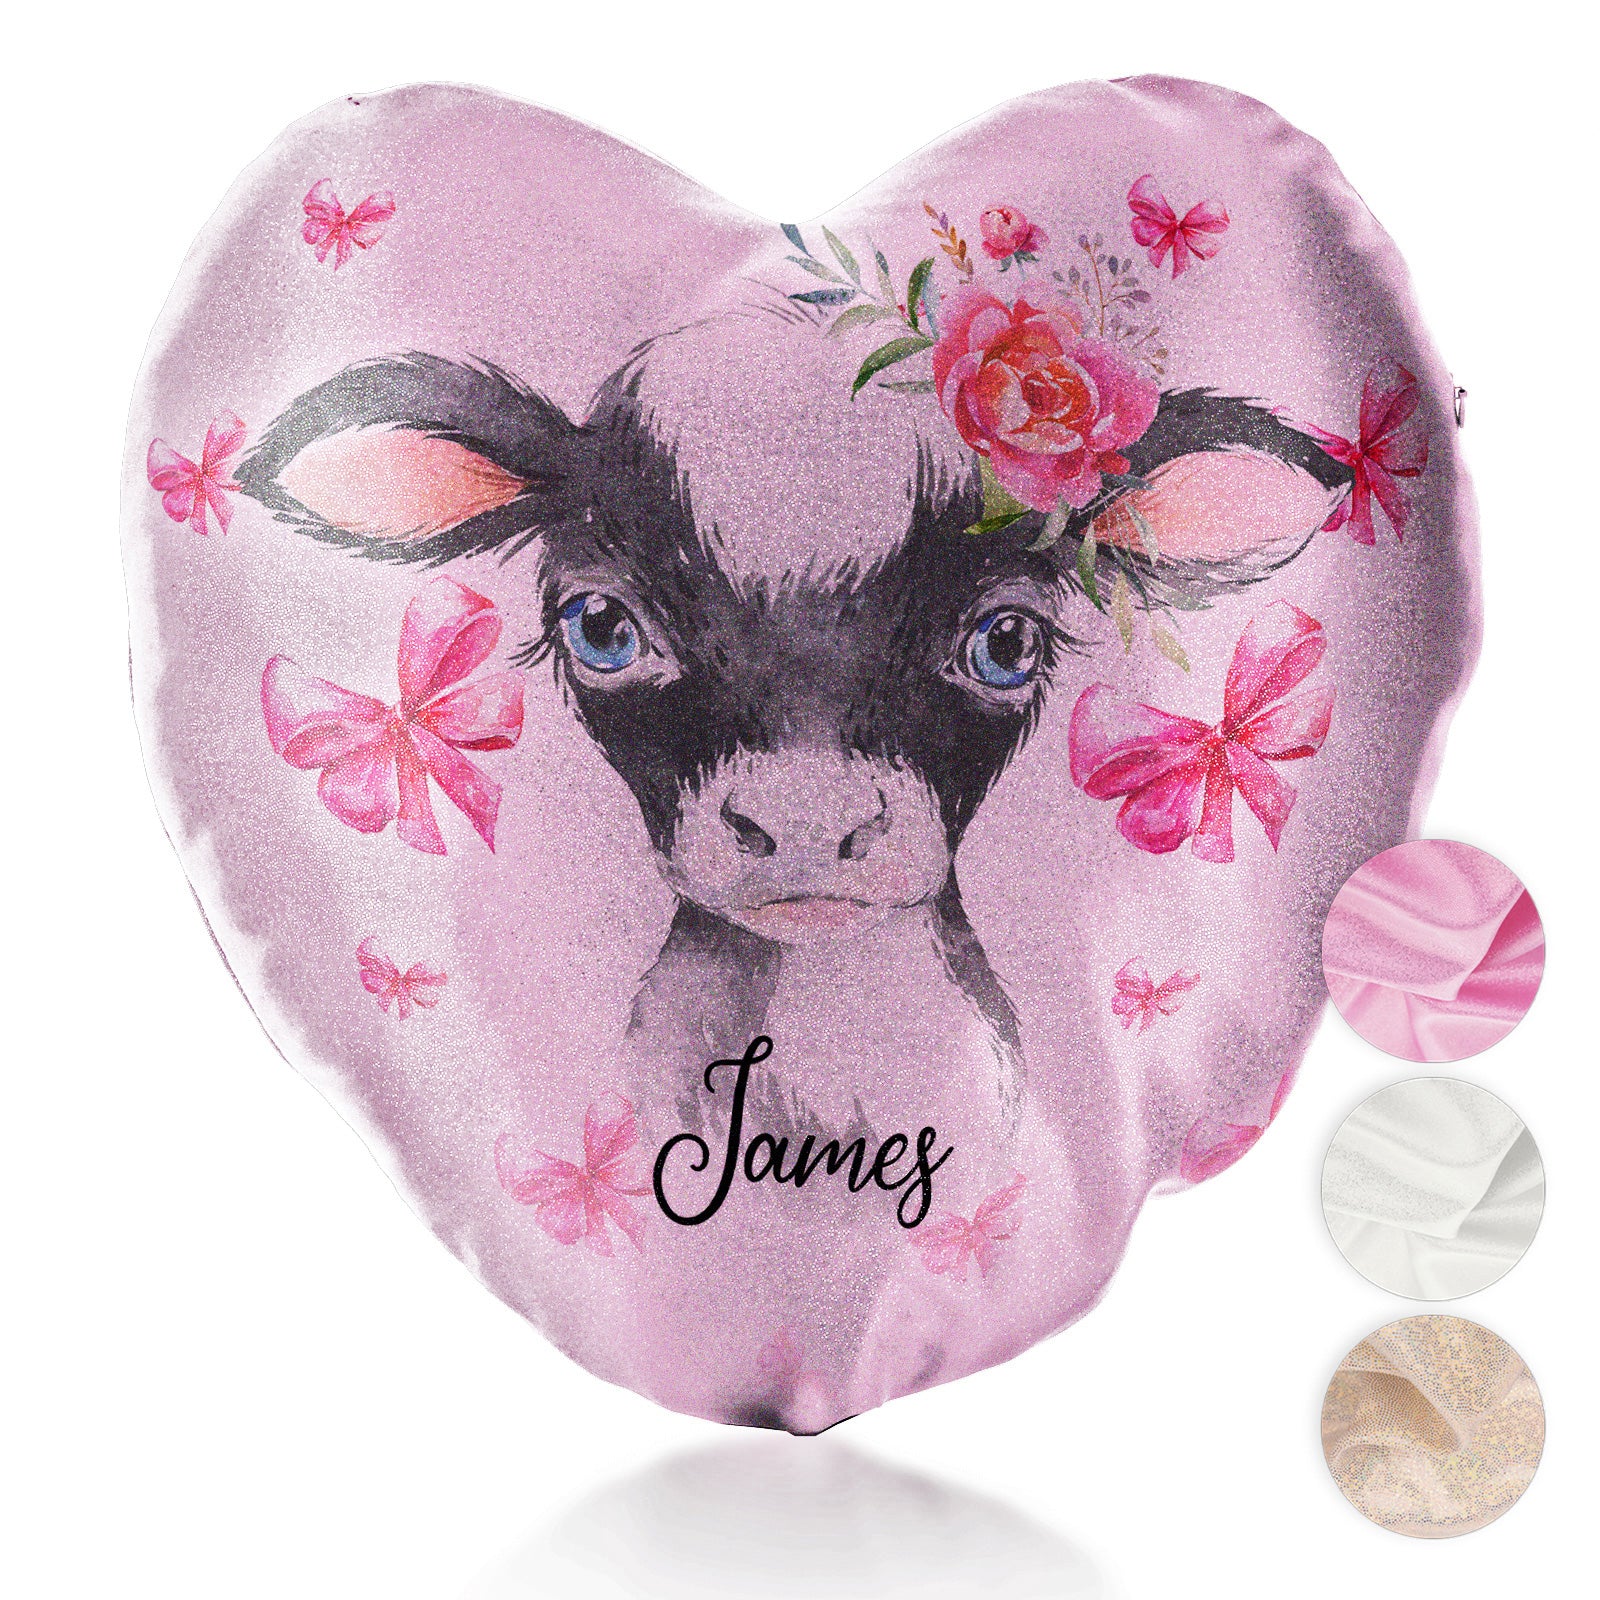 Personalised Glitter Heart Cushion with Cow Pink Bows and Cute Text